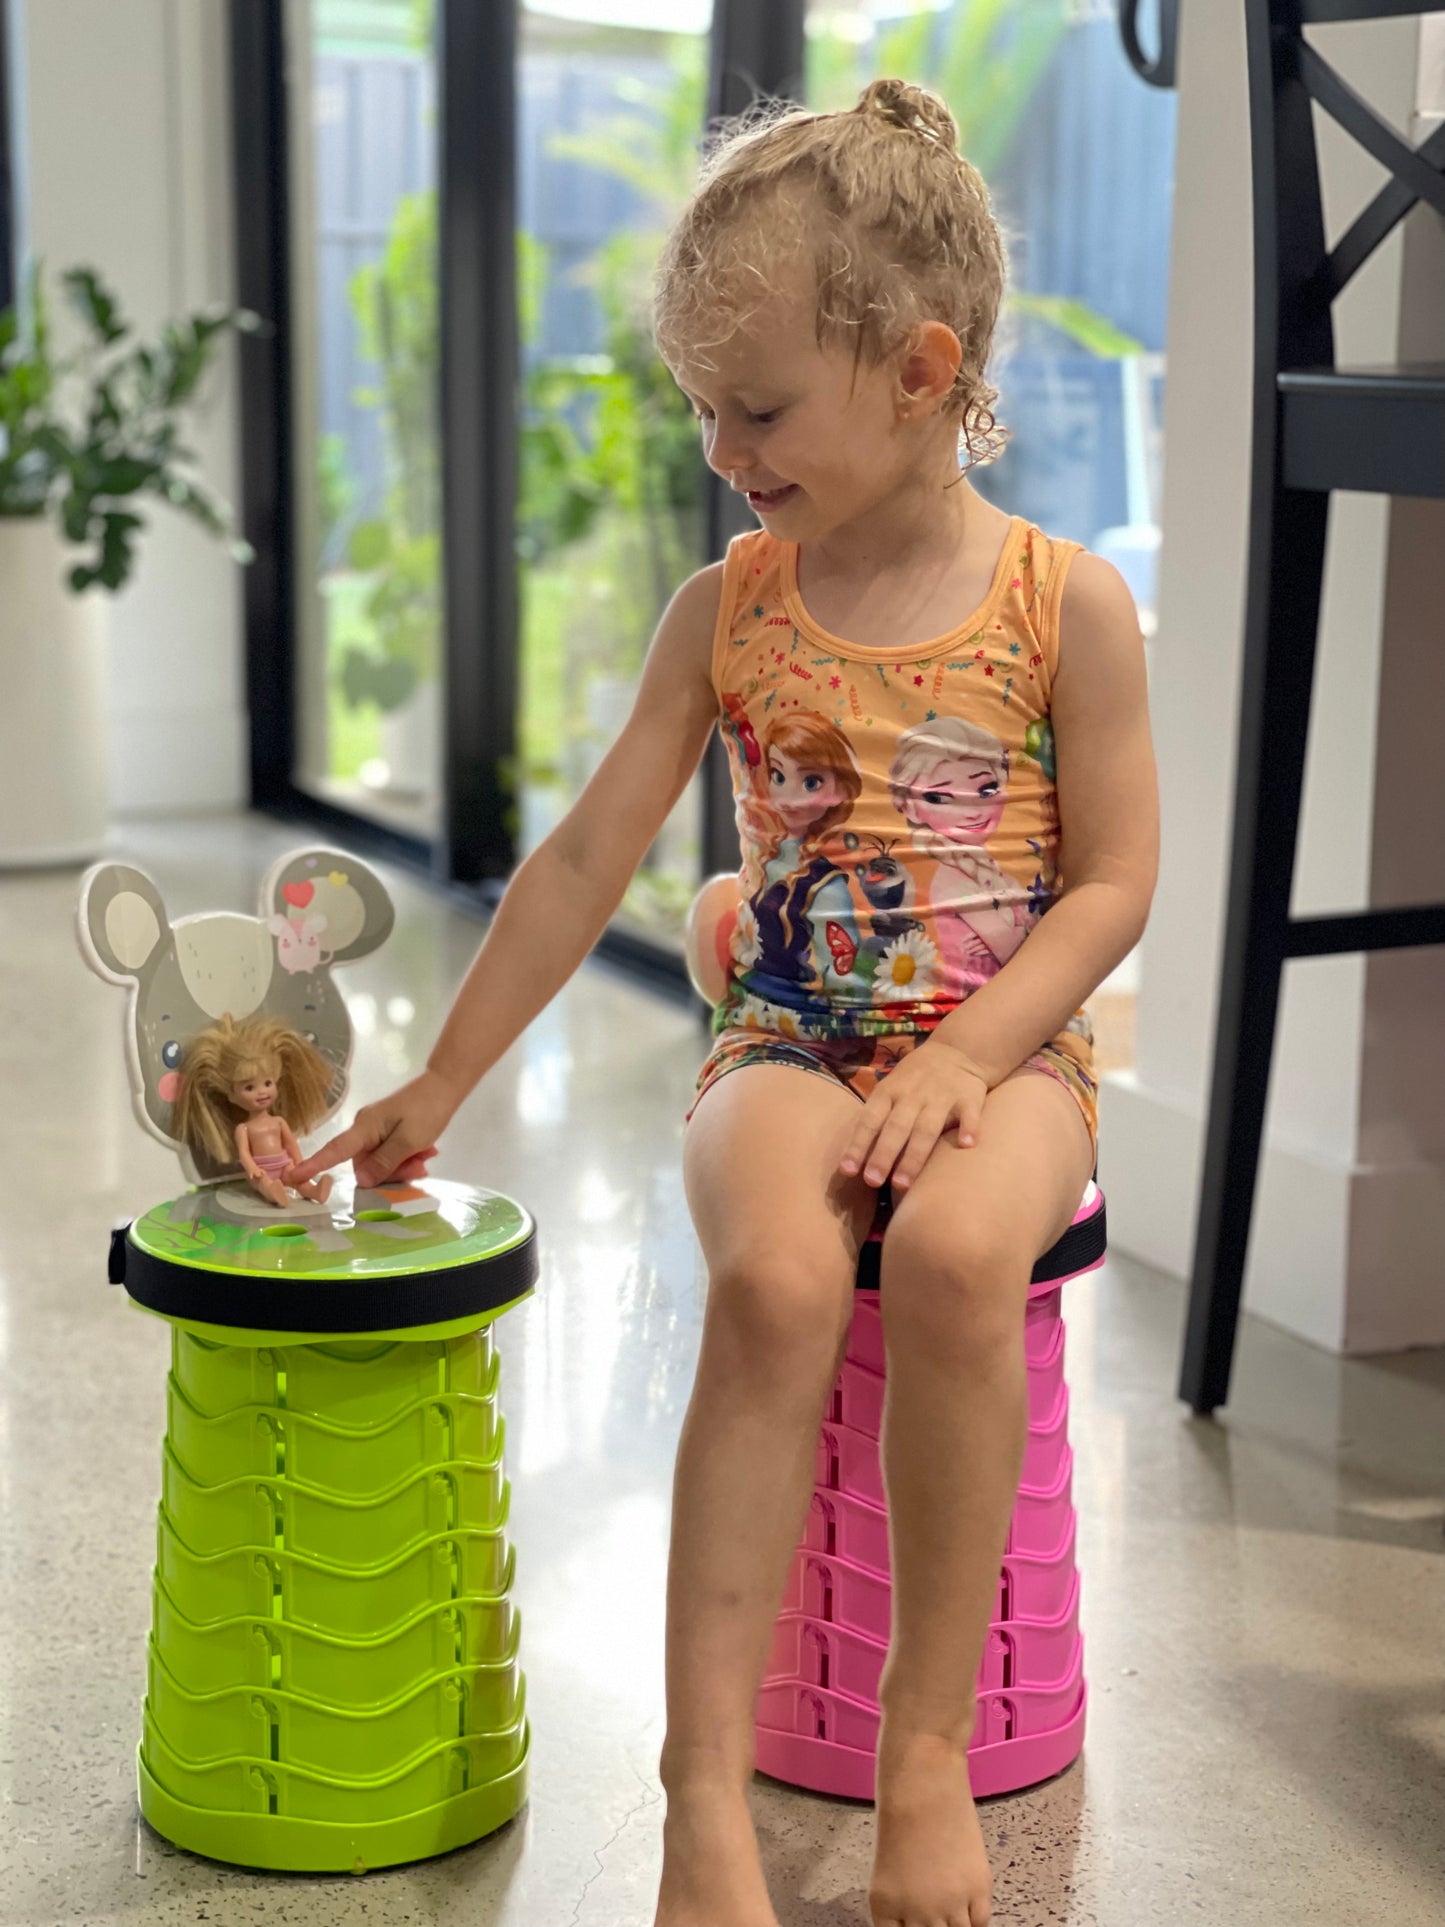 Kids Collapsible Stools